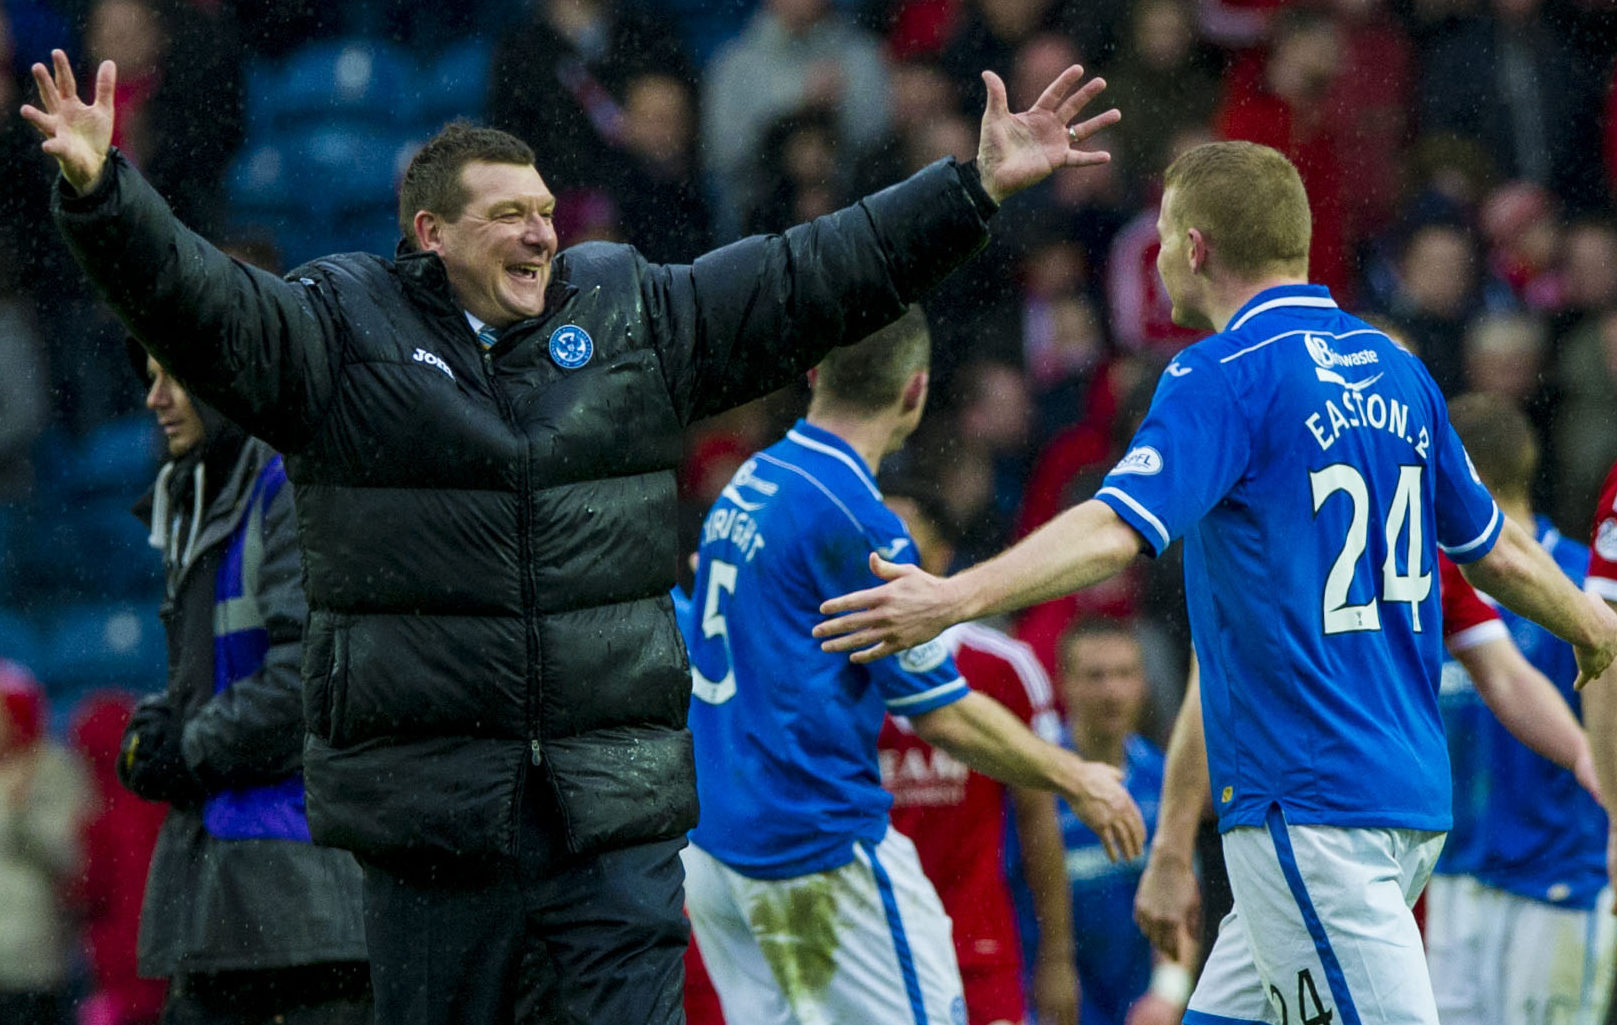 Tommy Wright celebrates getting to the Scottish Cup final with Brian Easton.